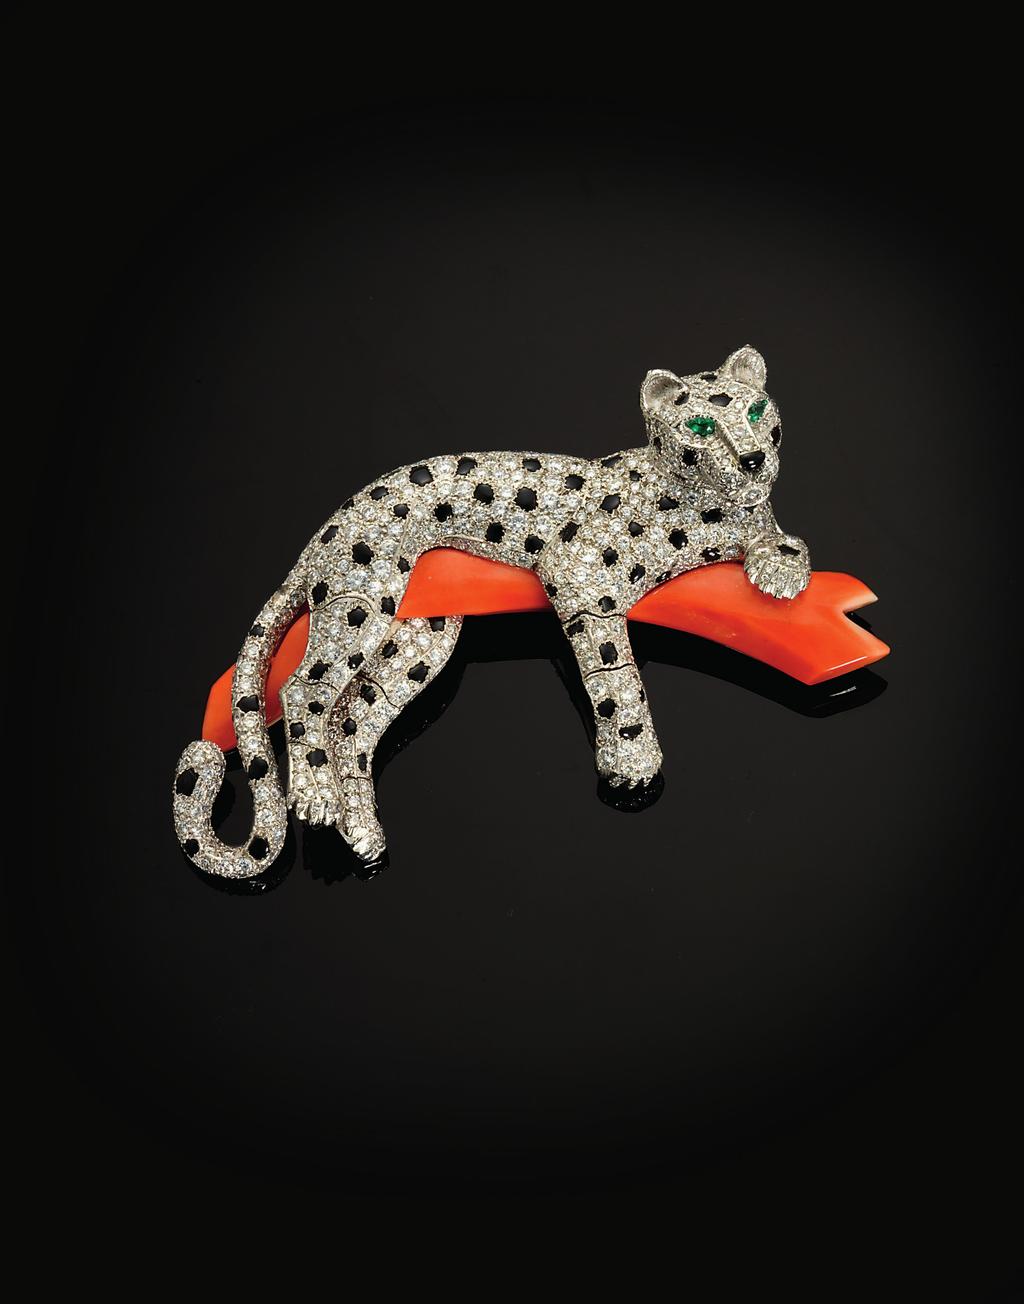 CORAL, ONYX AND DIAMOND PANTHER BROOCH, BY CARTIER, CIRCA 1978 60,000 100,000 Important Jewels London, King Street 3 June 2015